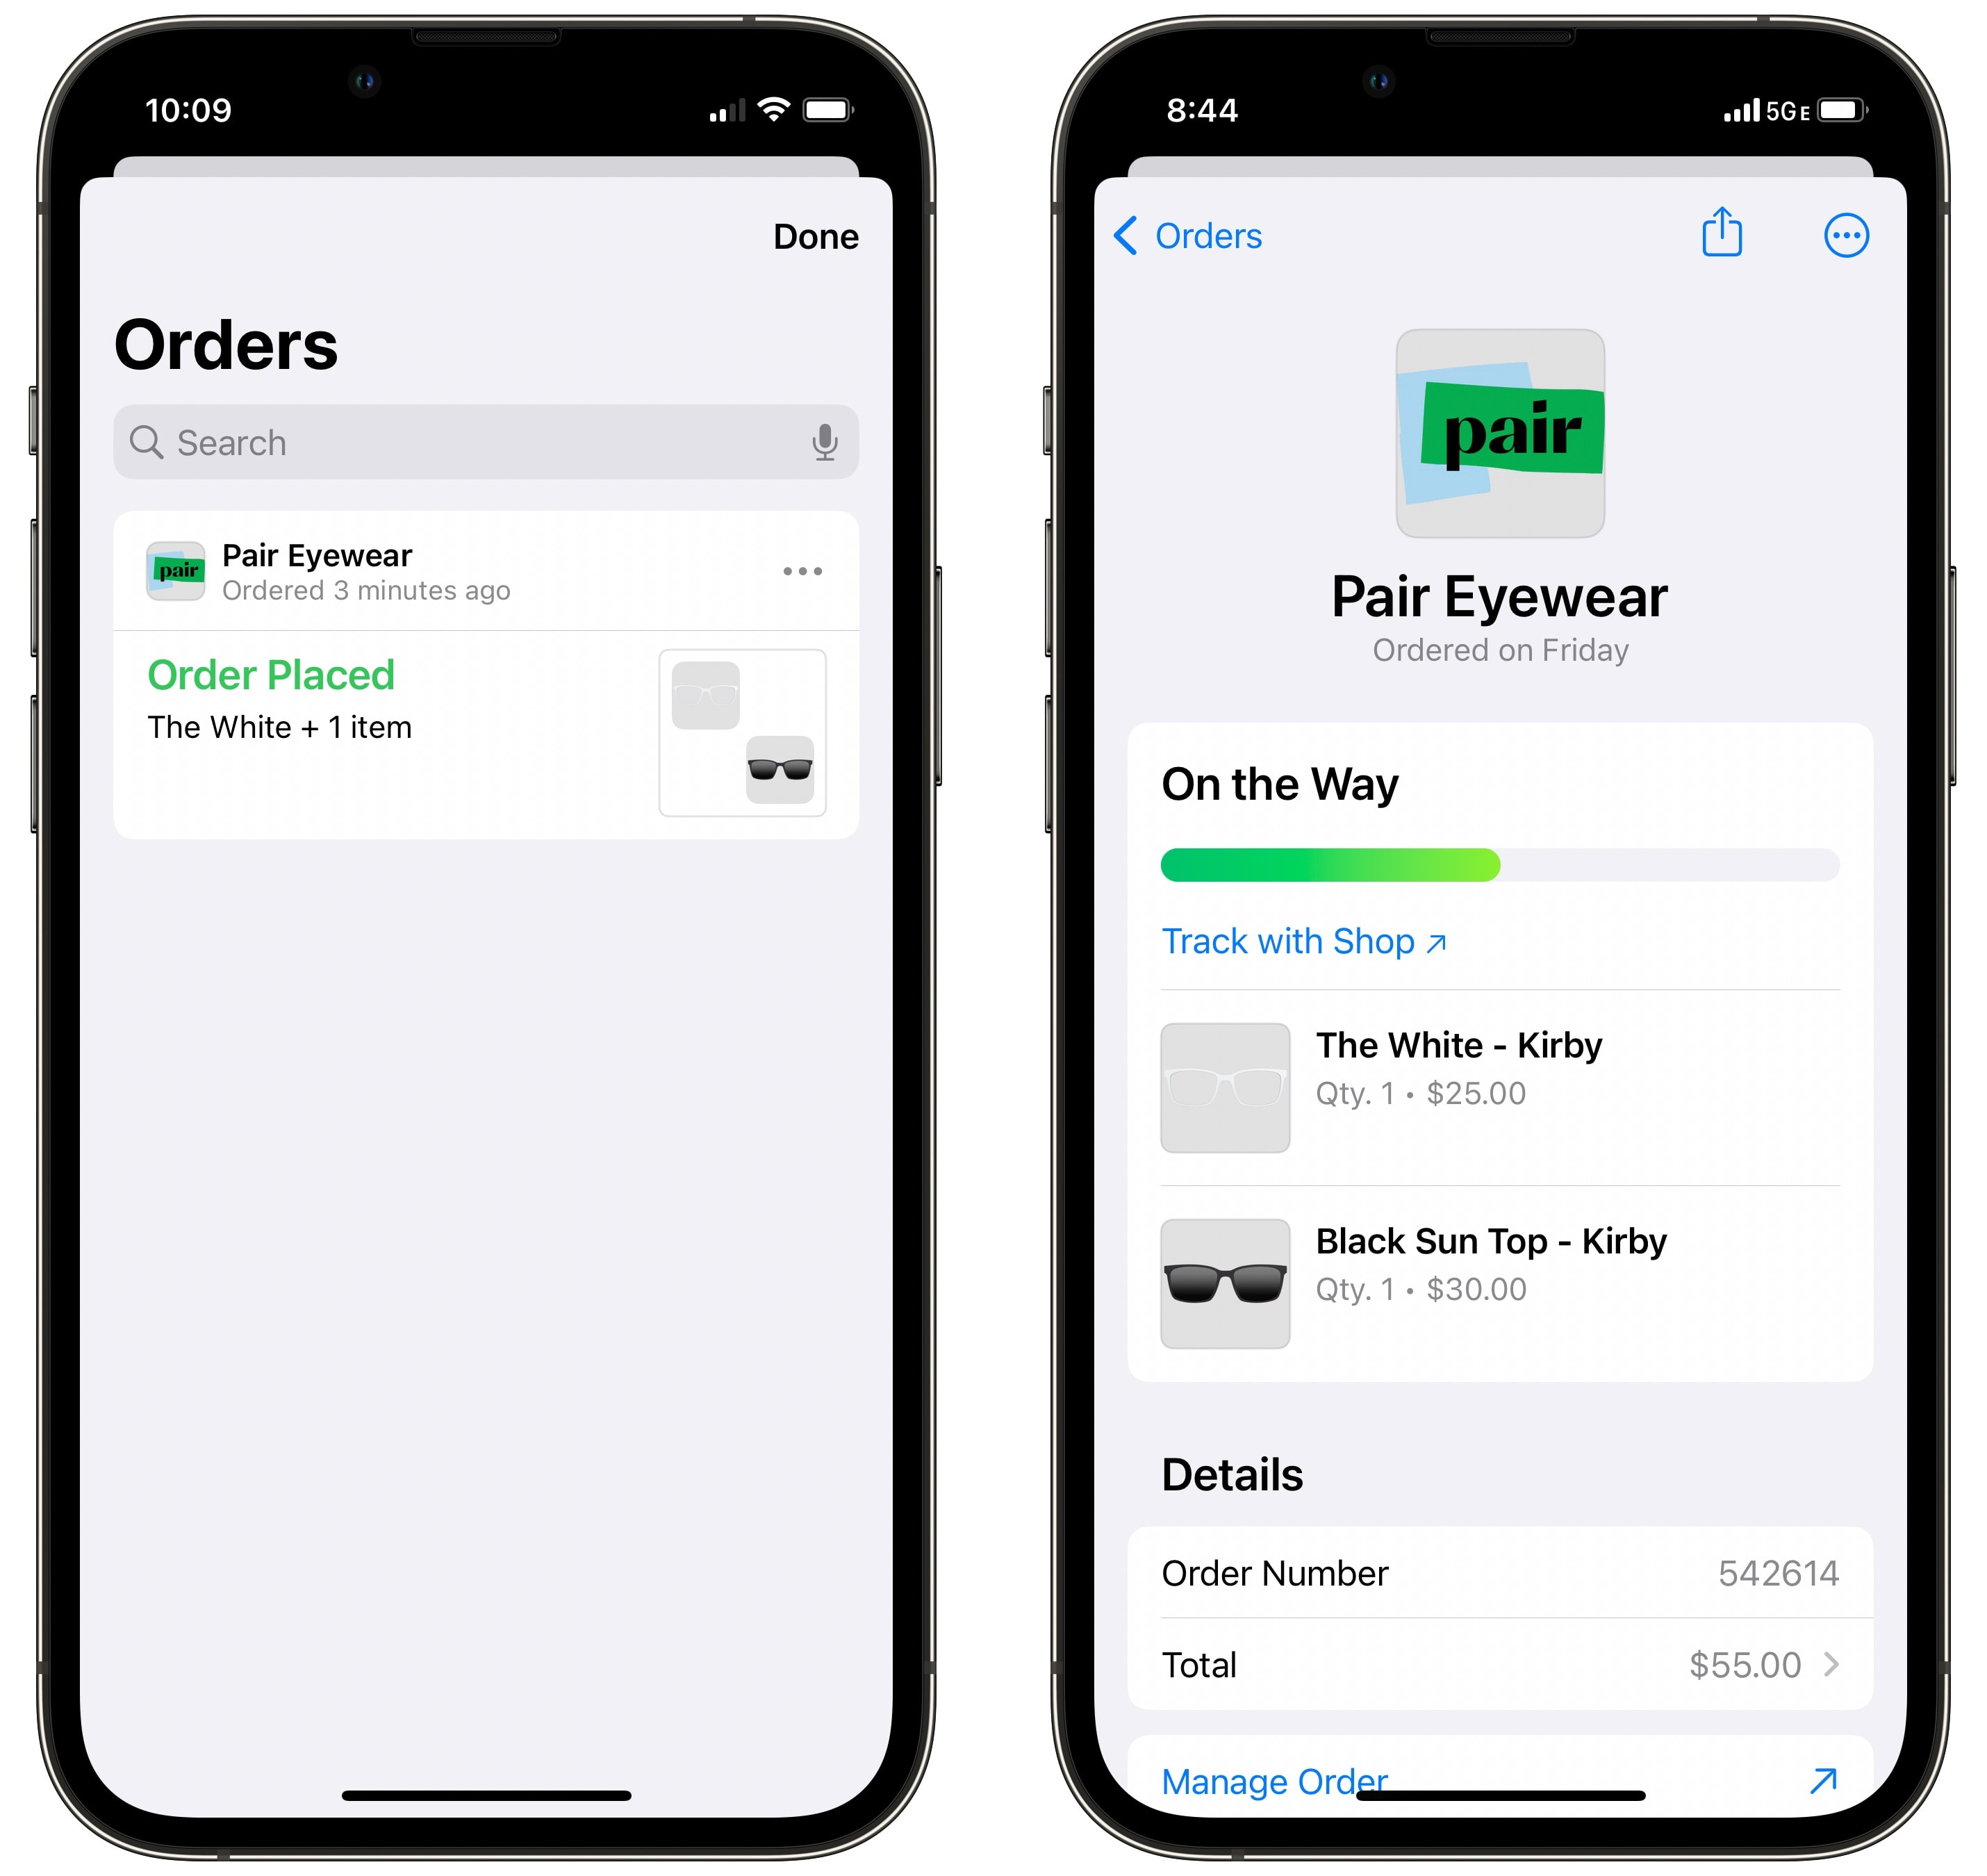 See all your orders in the Wallet app.